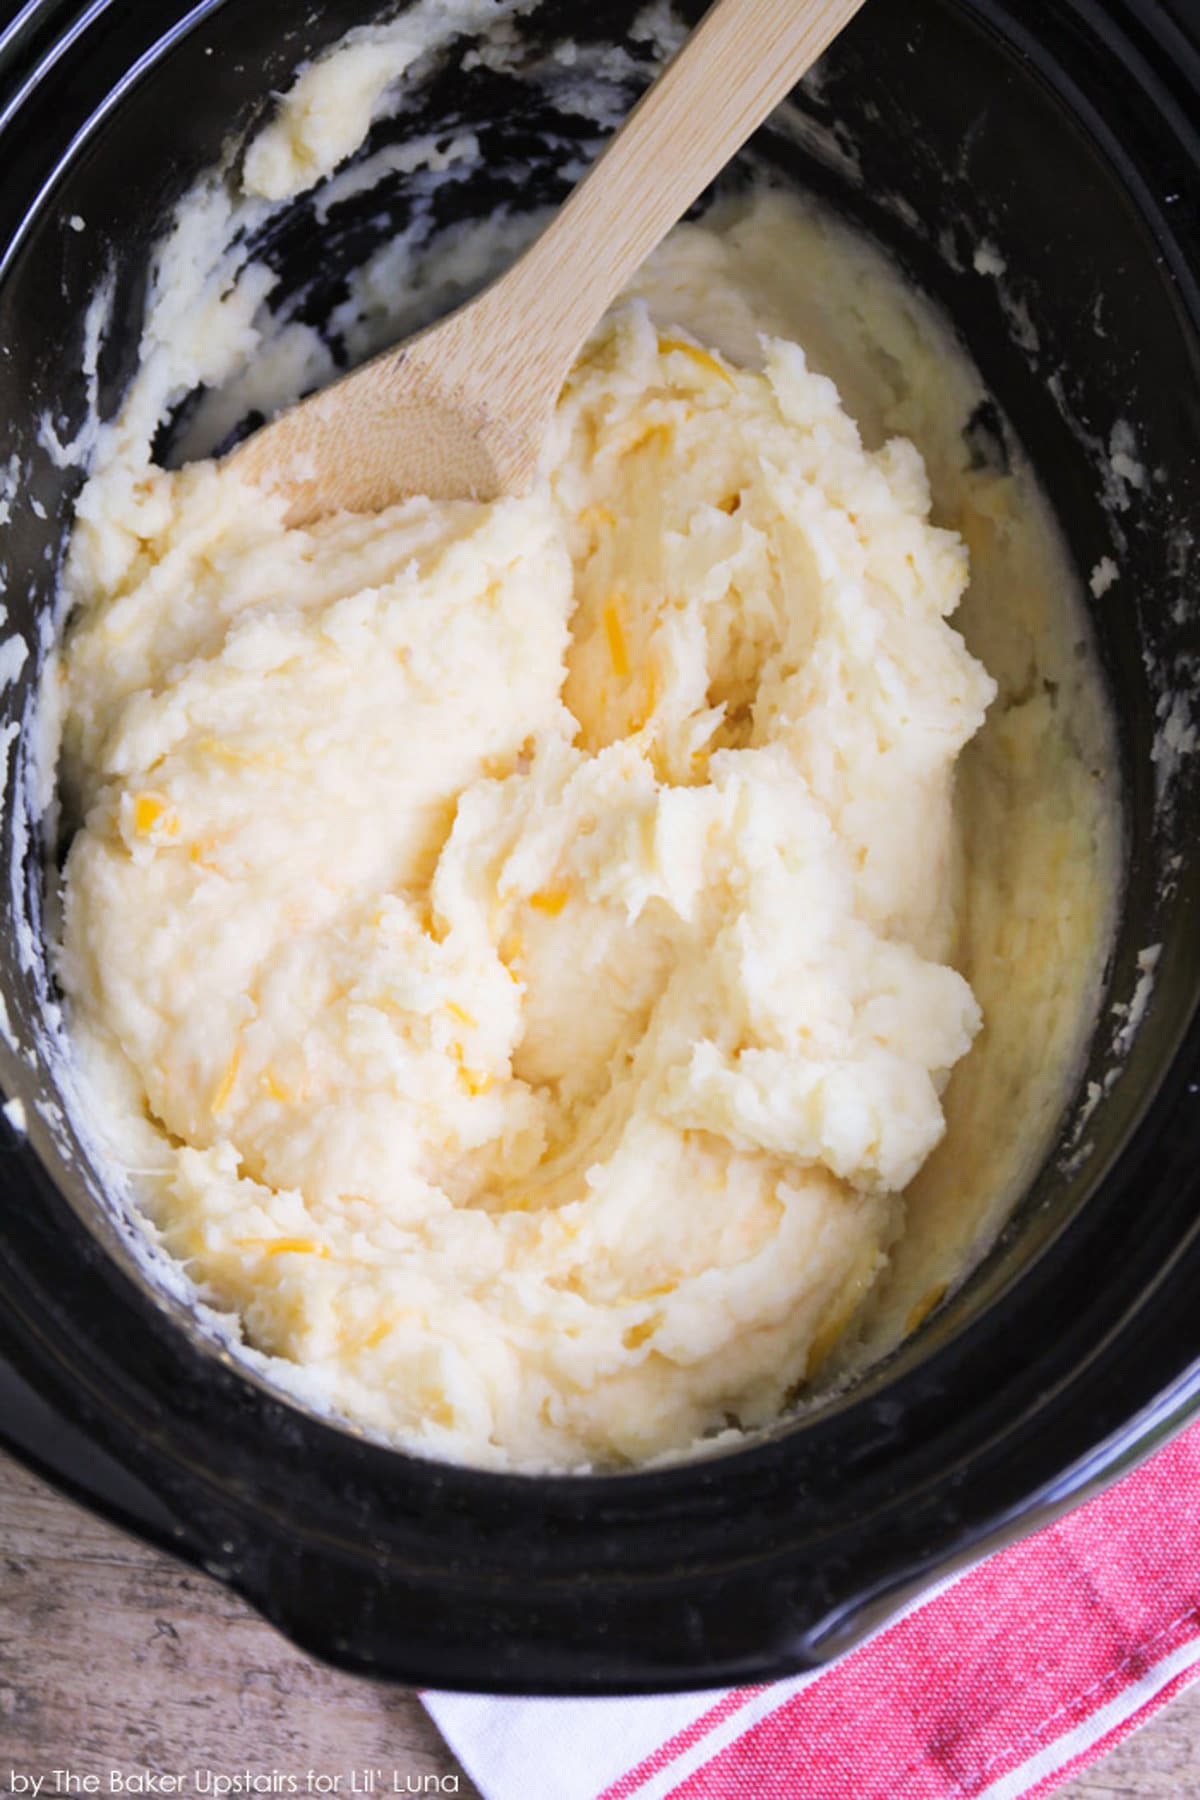 Mashed potatoes in slow cooker